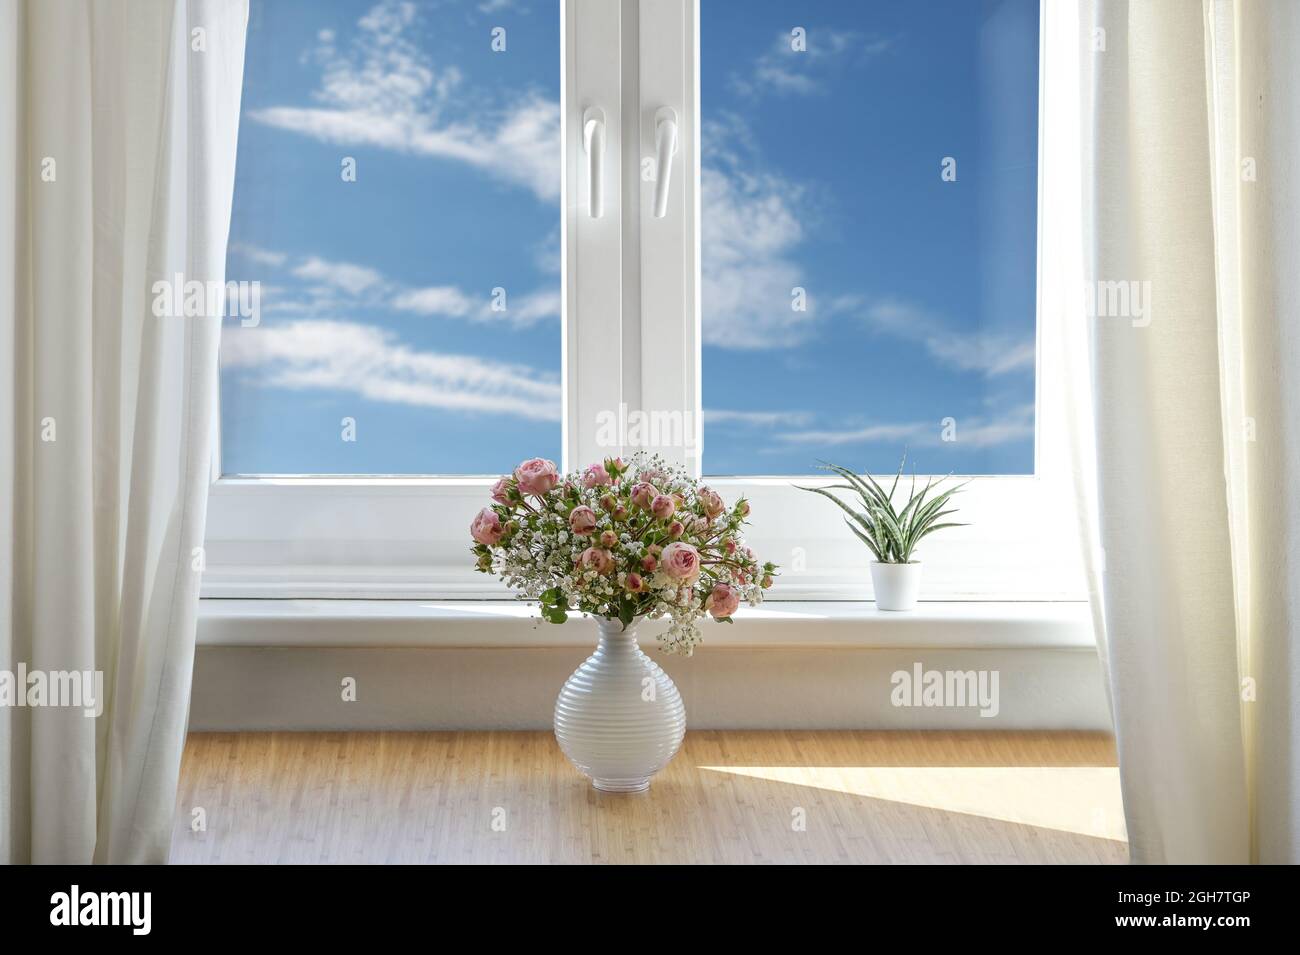 romantic flower bouquet with roses and baby's breath in a white vase on a table by the window with blue sky and clouds, copy space, selected focus Stock Photo